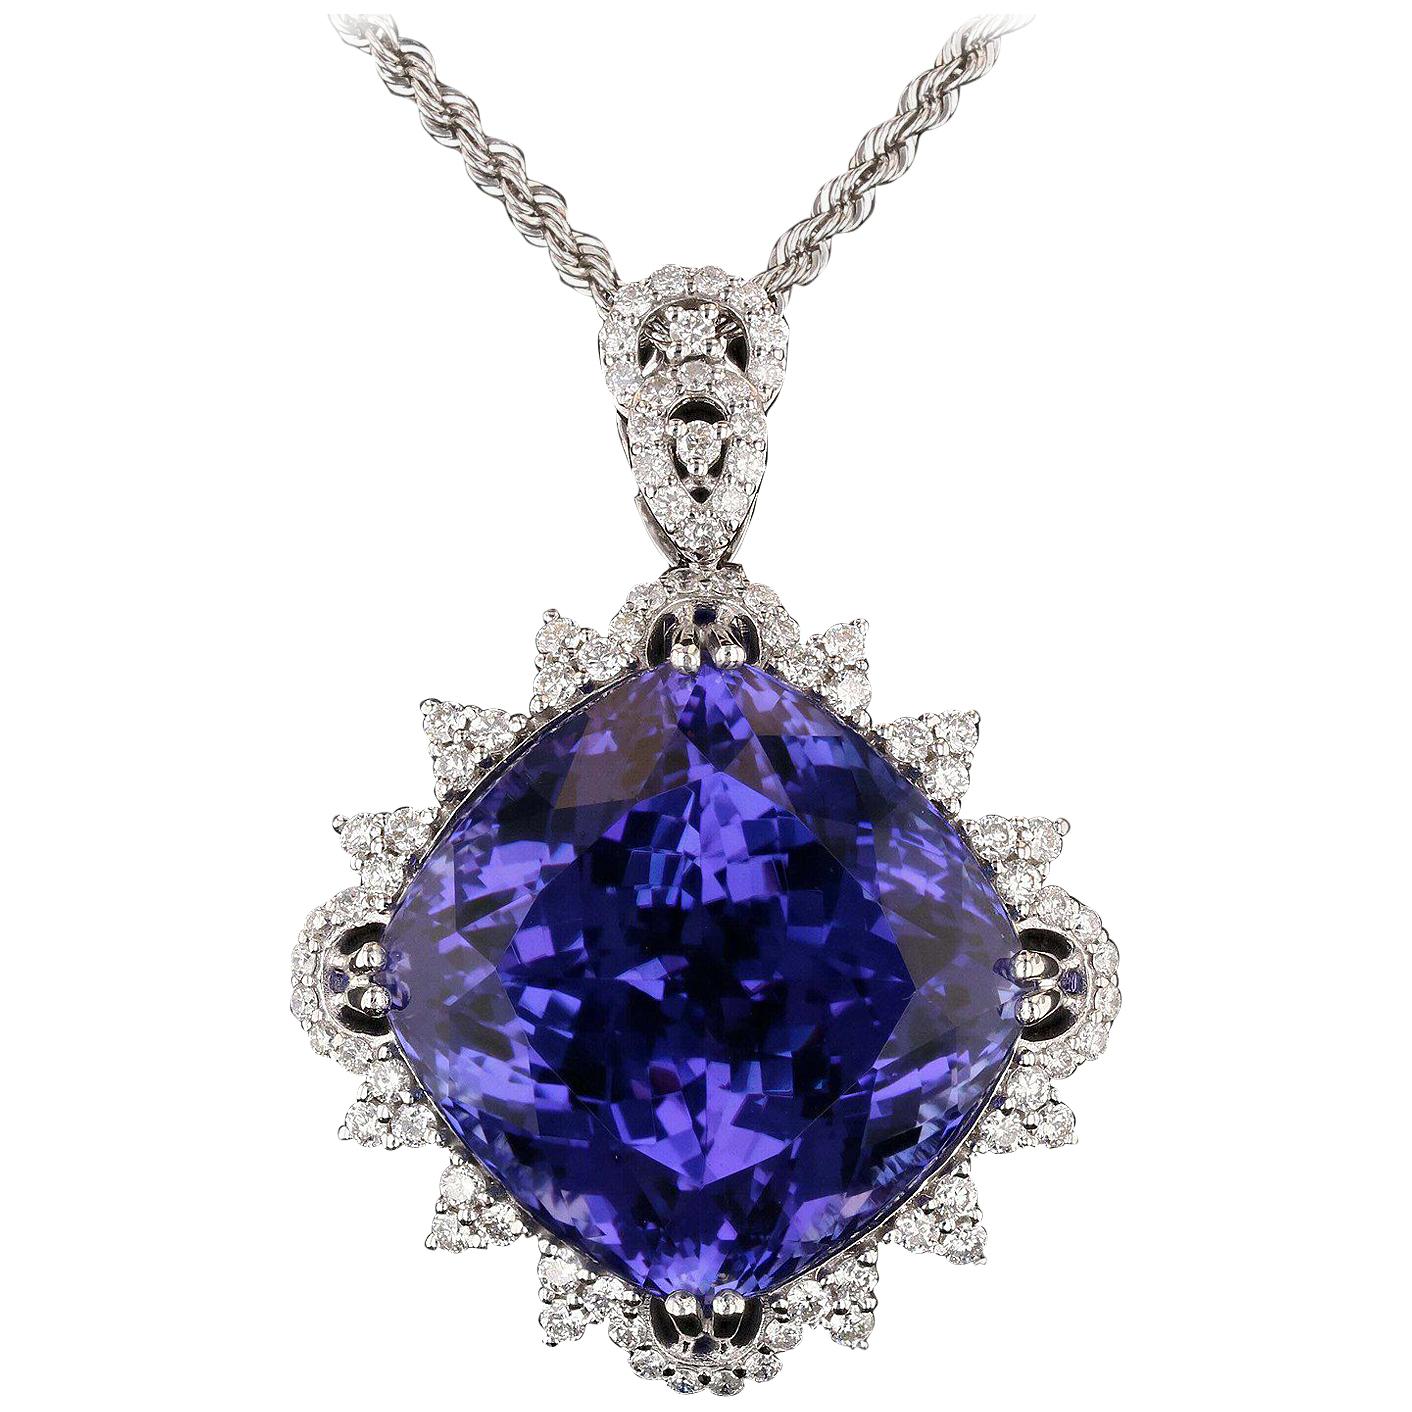 GIA Certified 82.87 Carat Tanzanite Pendant Necklace For Sale